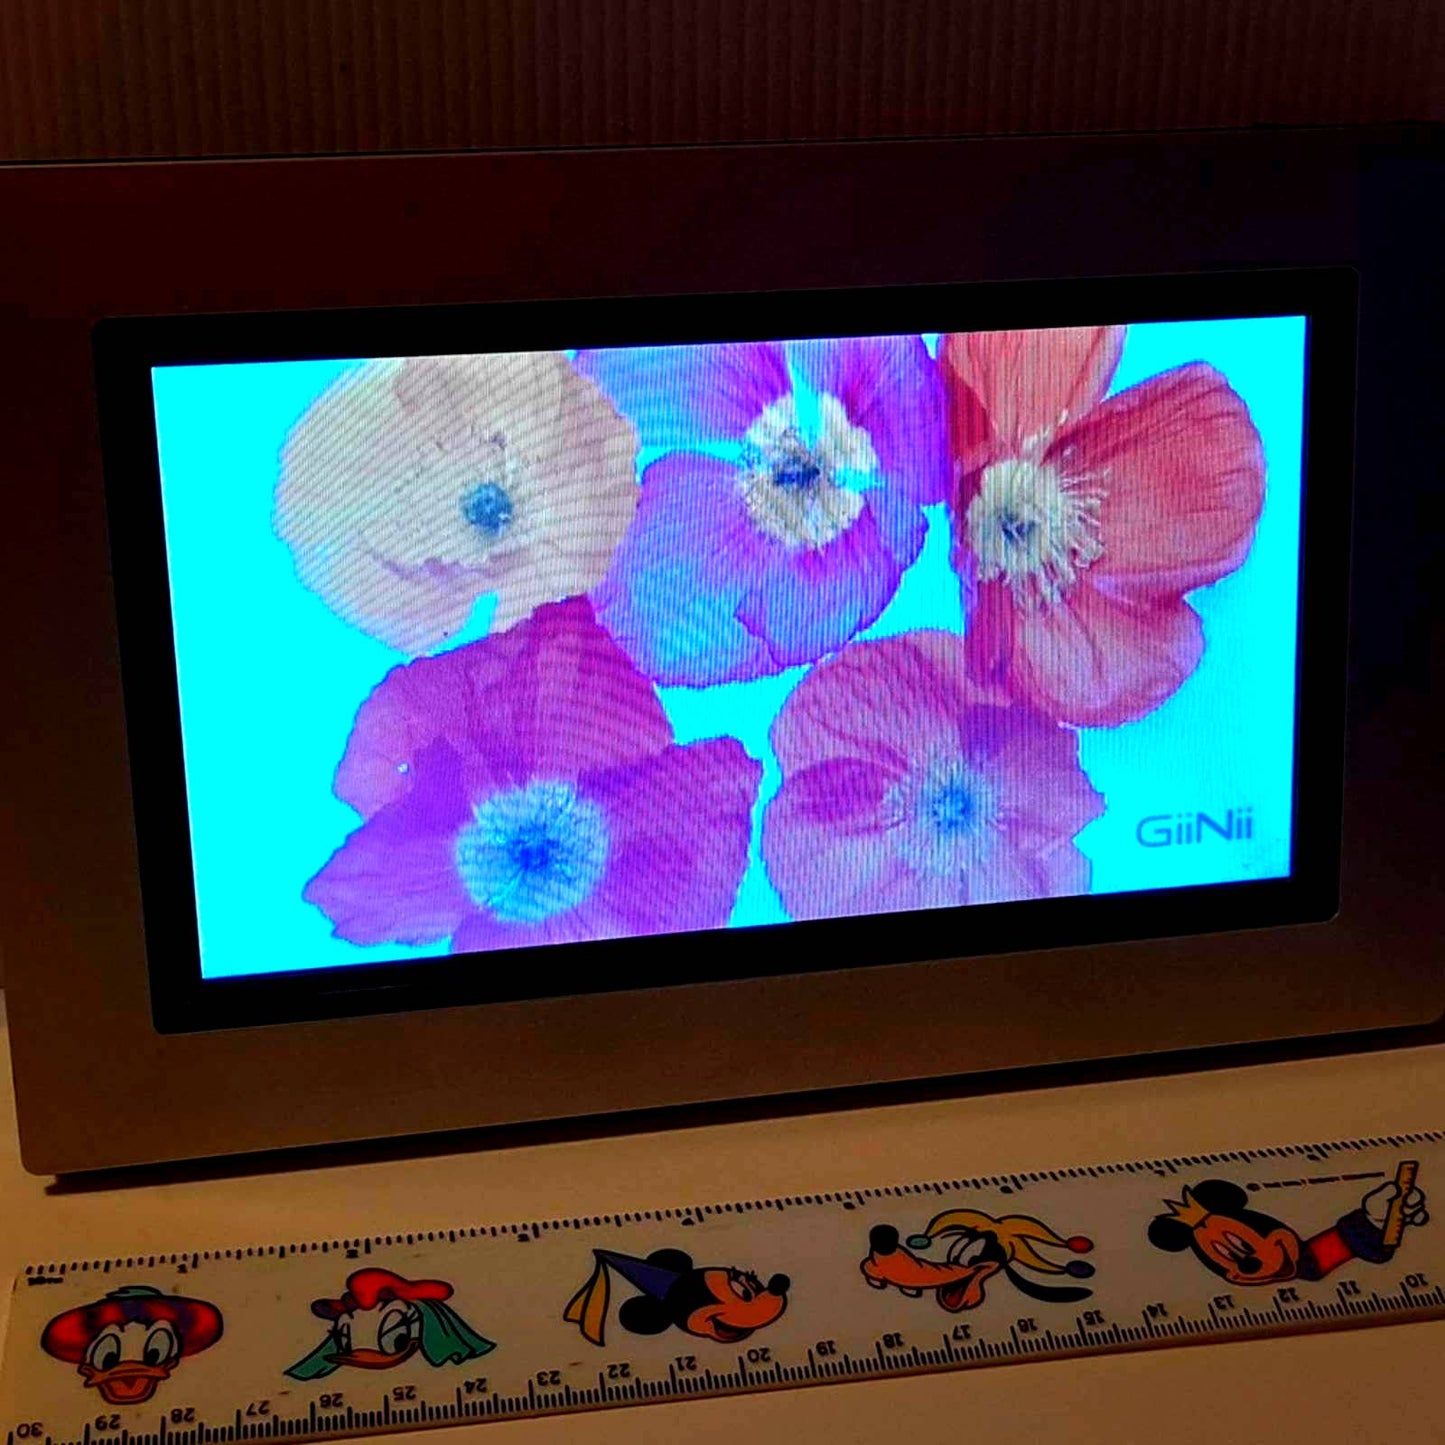 GIINII 8" Digital picture frame used but works great